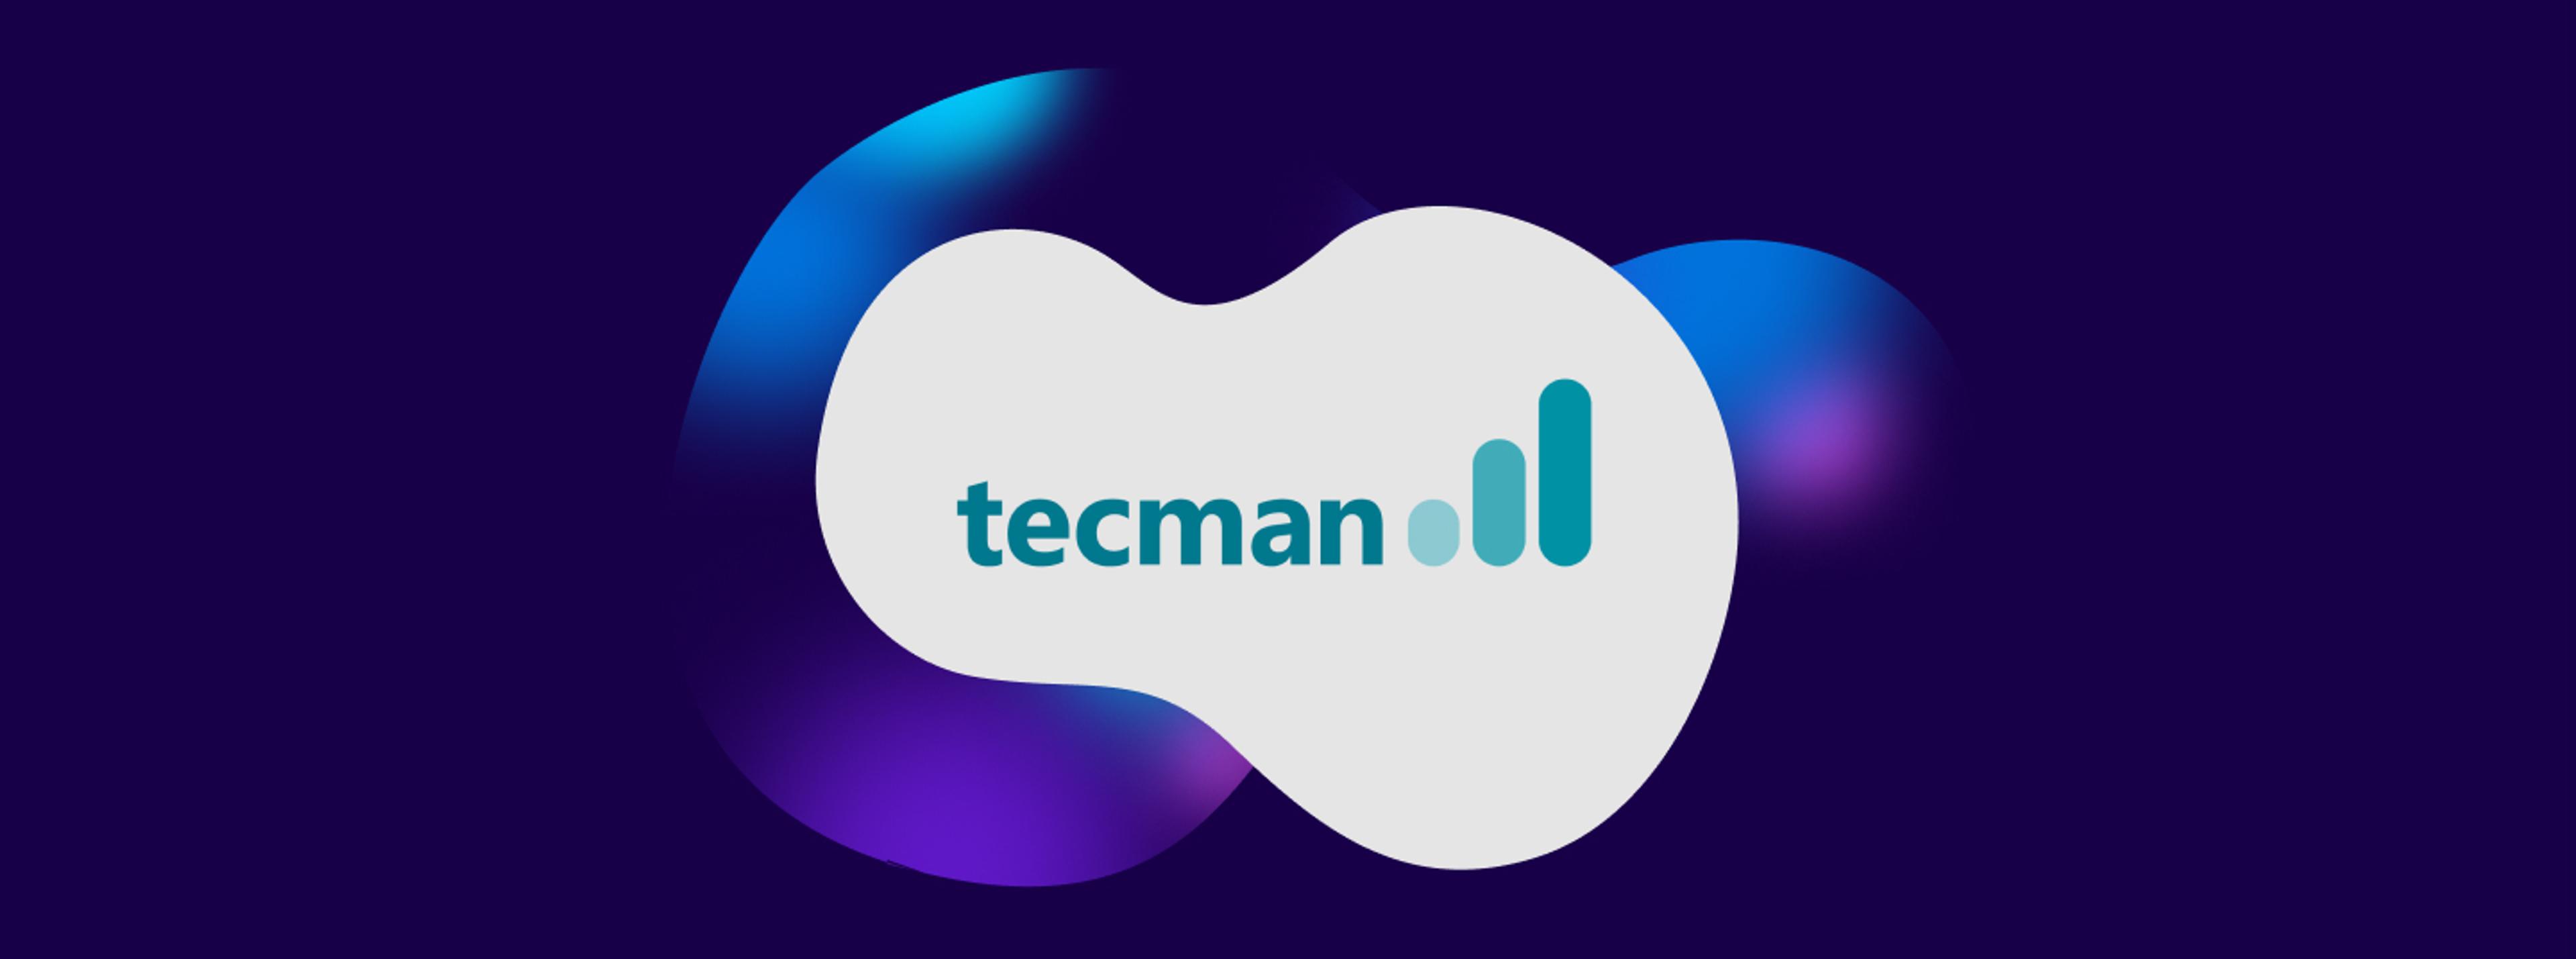 Tecman logo on a white background with a dark blue blob in the background